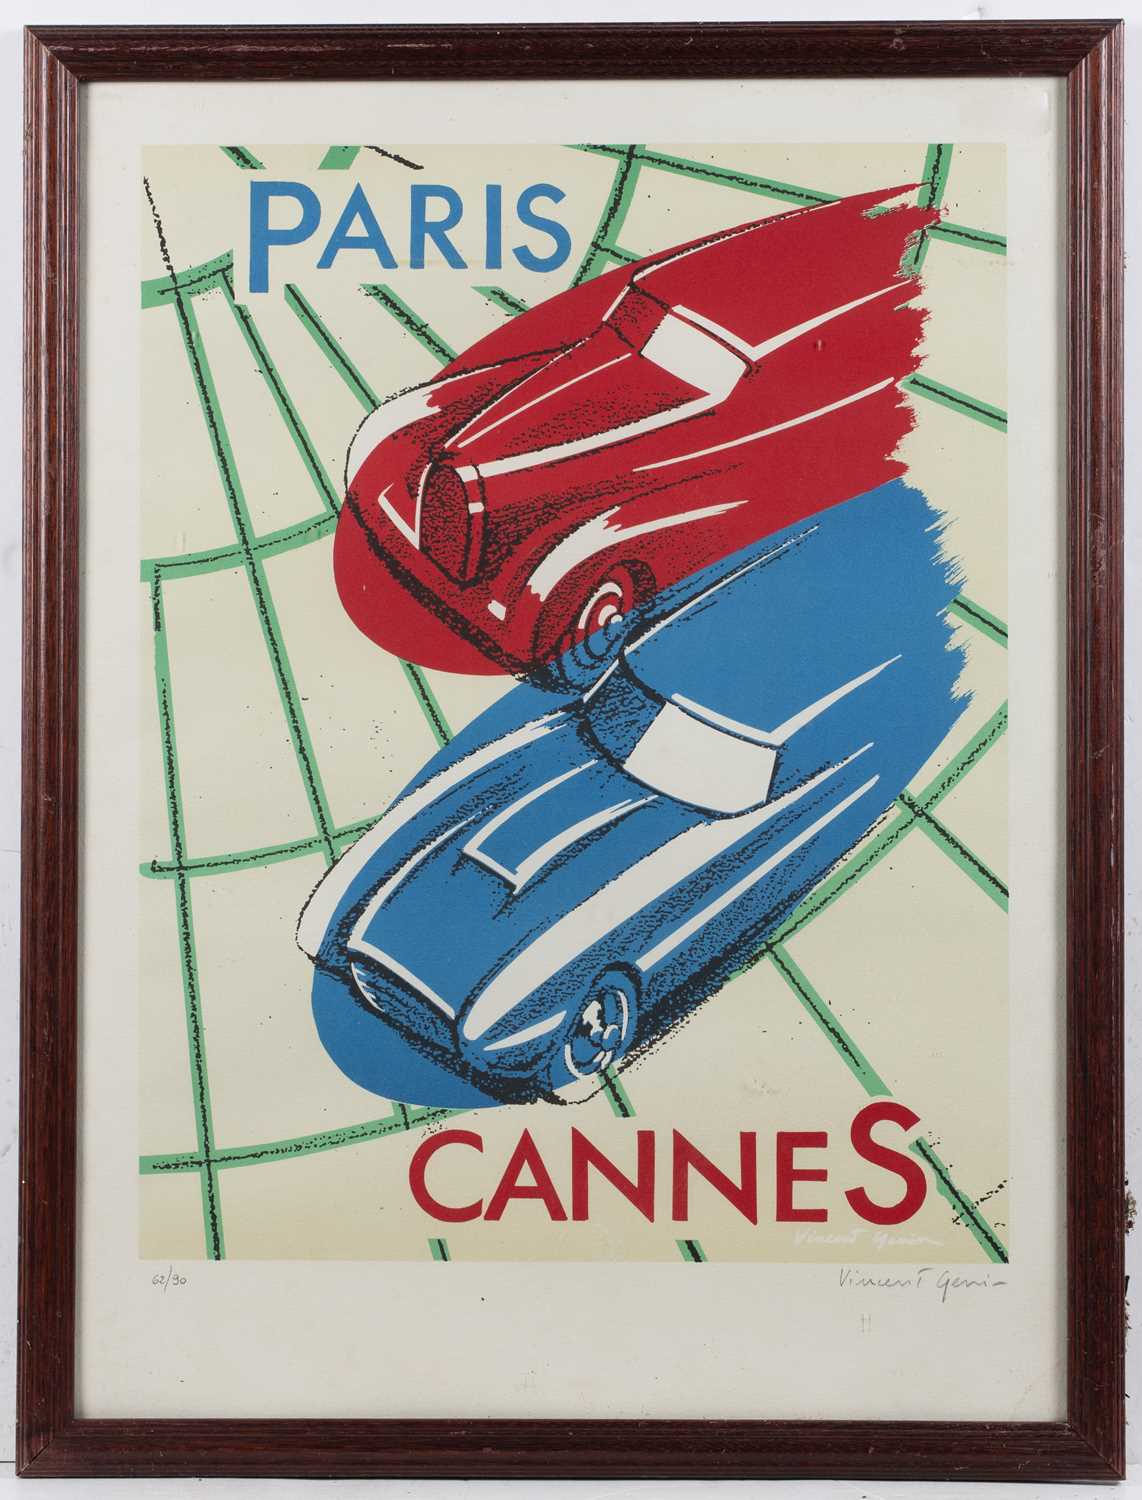 Vincent Geni (20th century) 'Paris, Cannes', lithograph in colours, pencil signed in the margin - Image 3 of 6